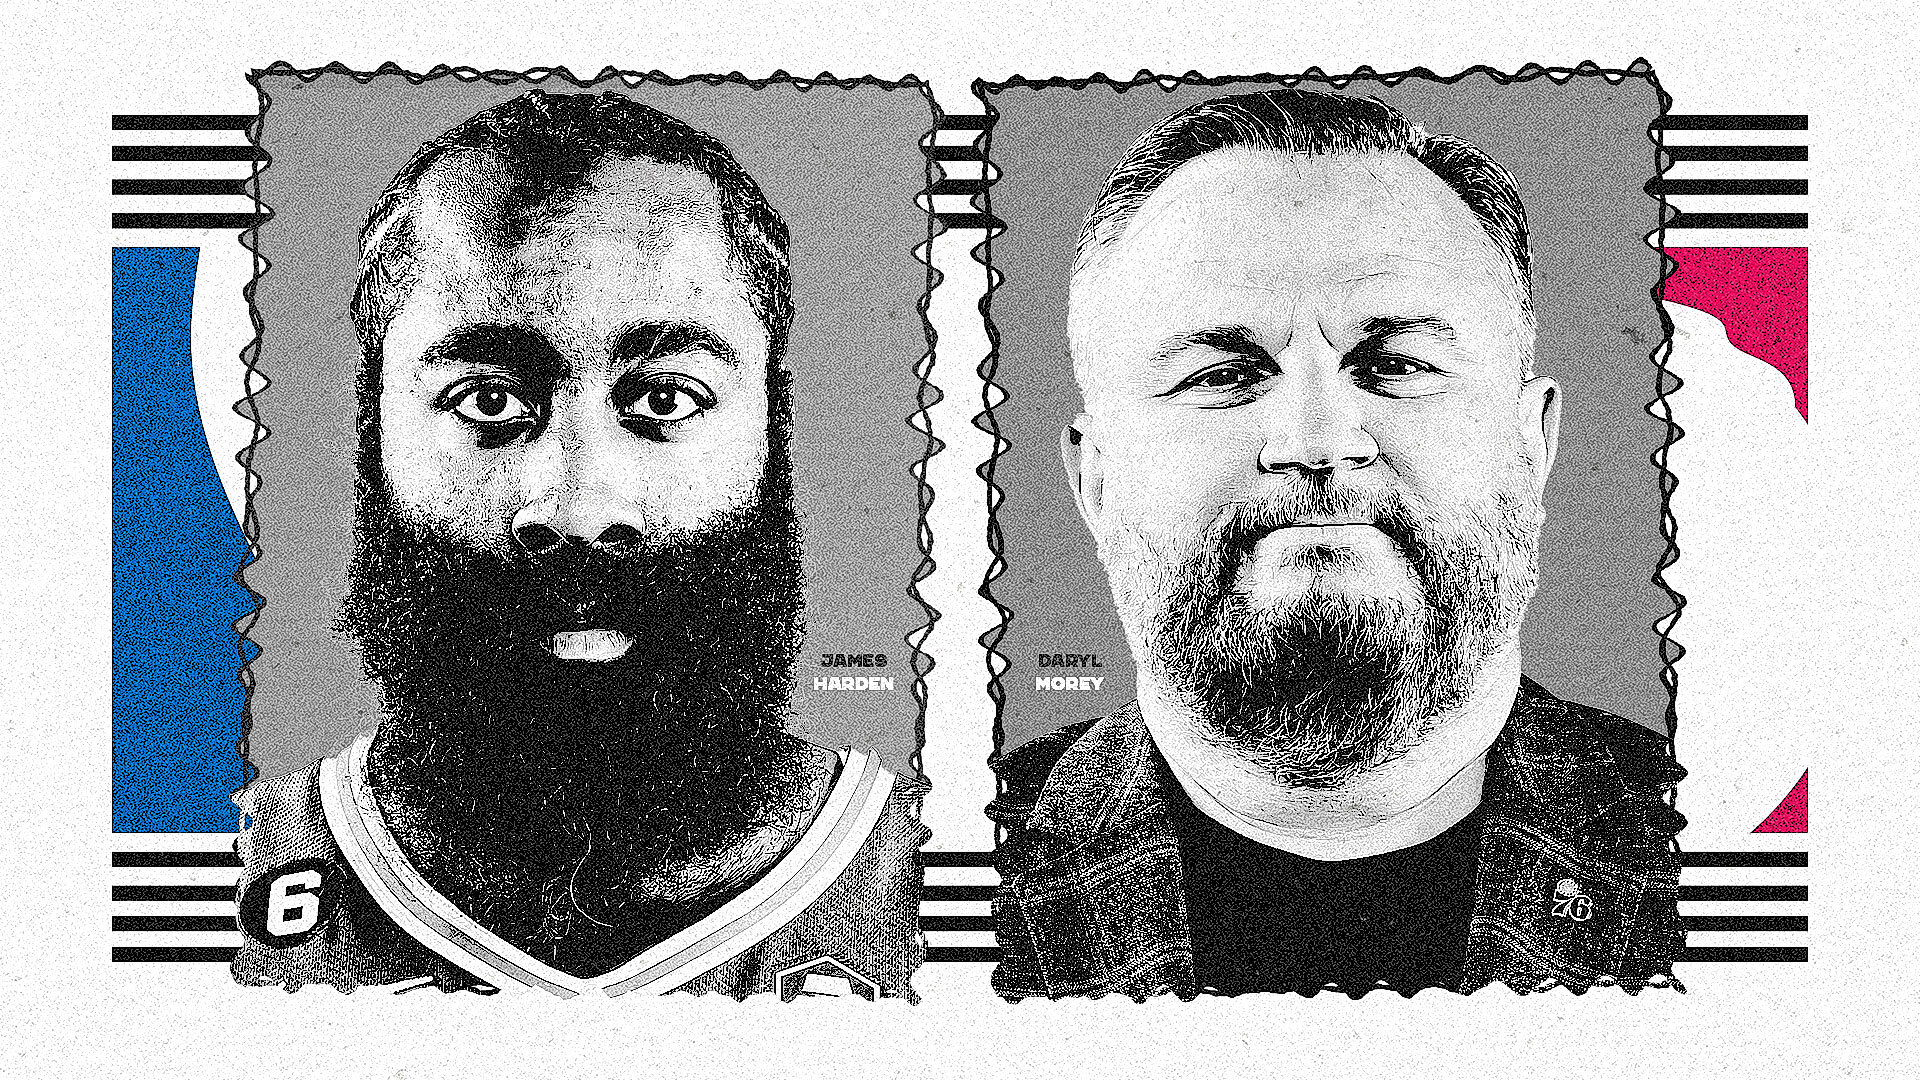 Emotion vs. Analytics: Why James Harden and Daryl Morey were always destined to implode